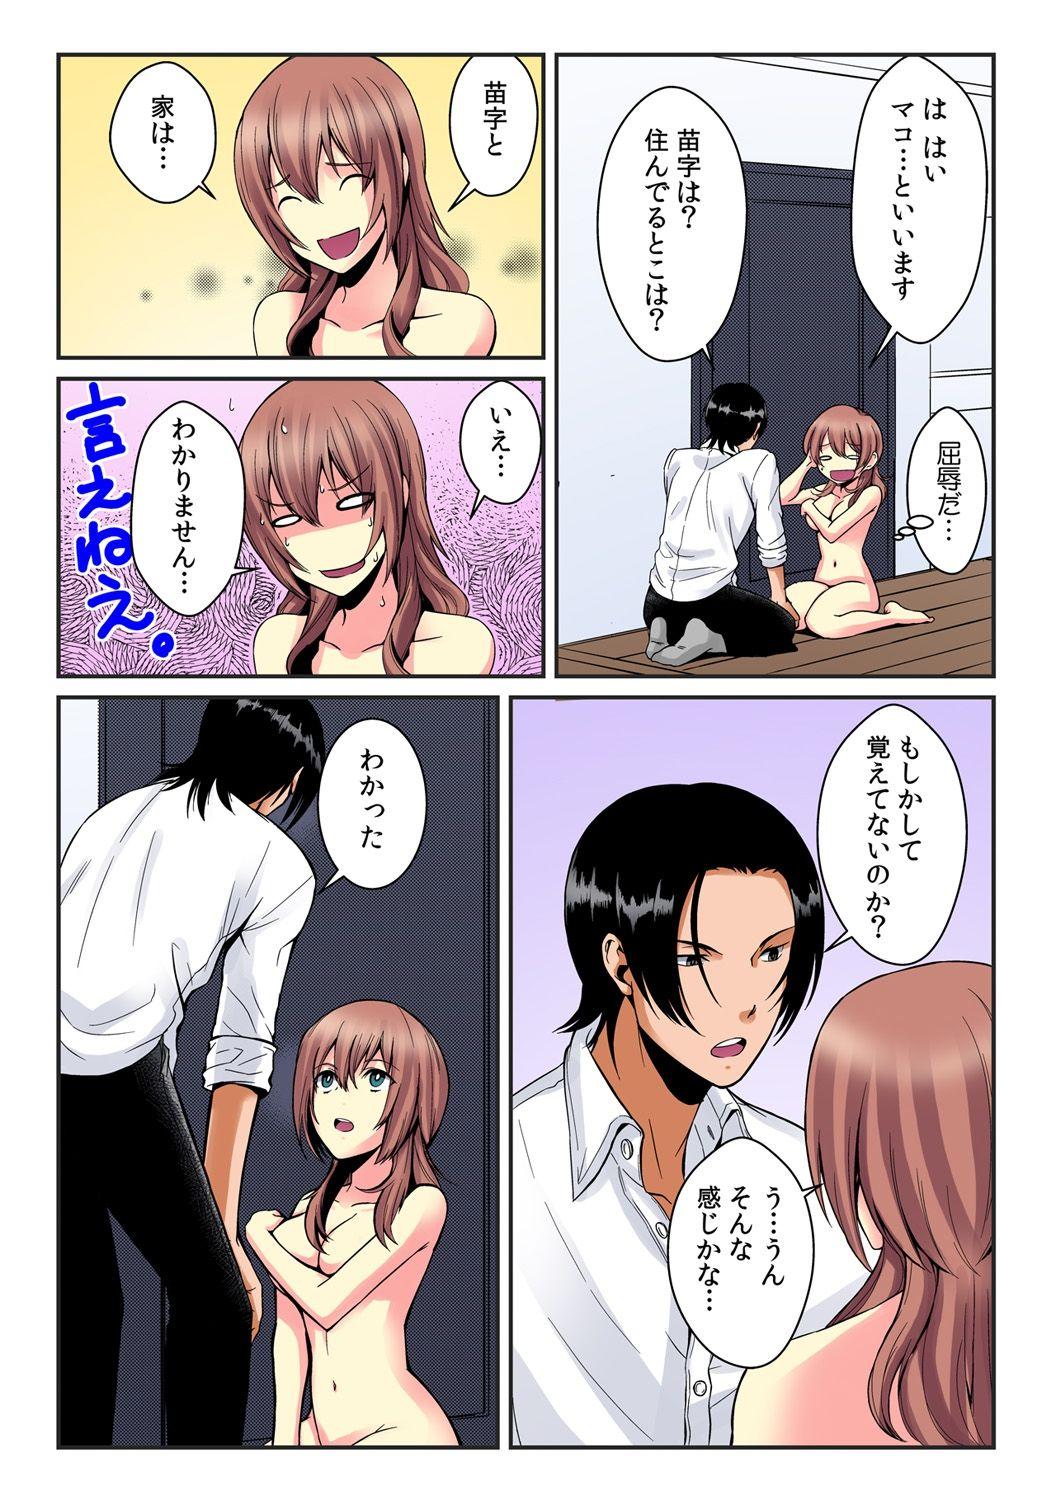 [Akagi Gijou / Akahige] I became a girl- and I definitely can't let anyone find out! (Full color) 1 23